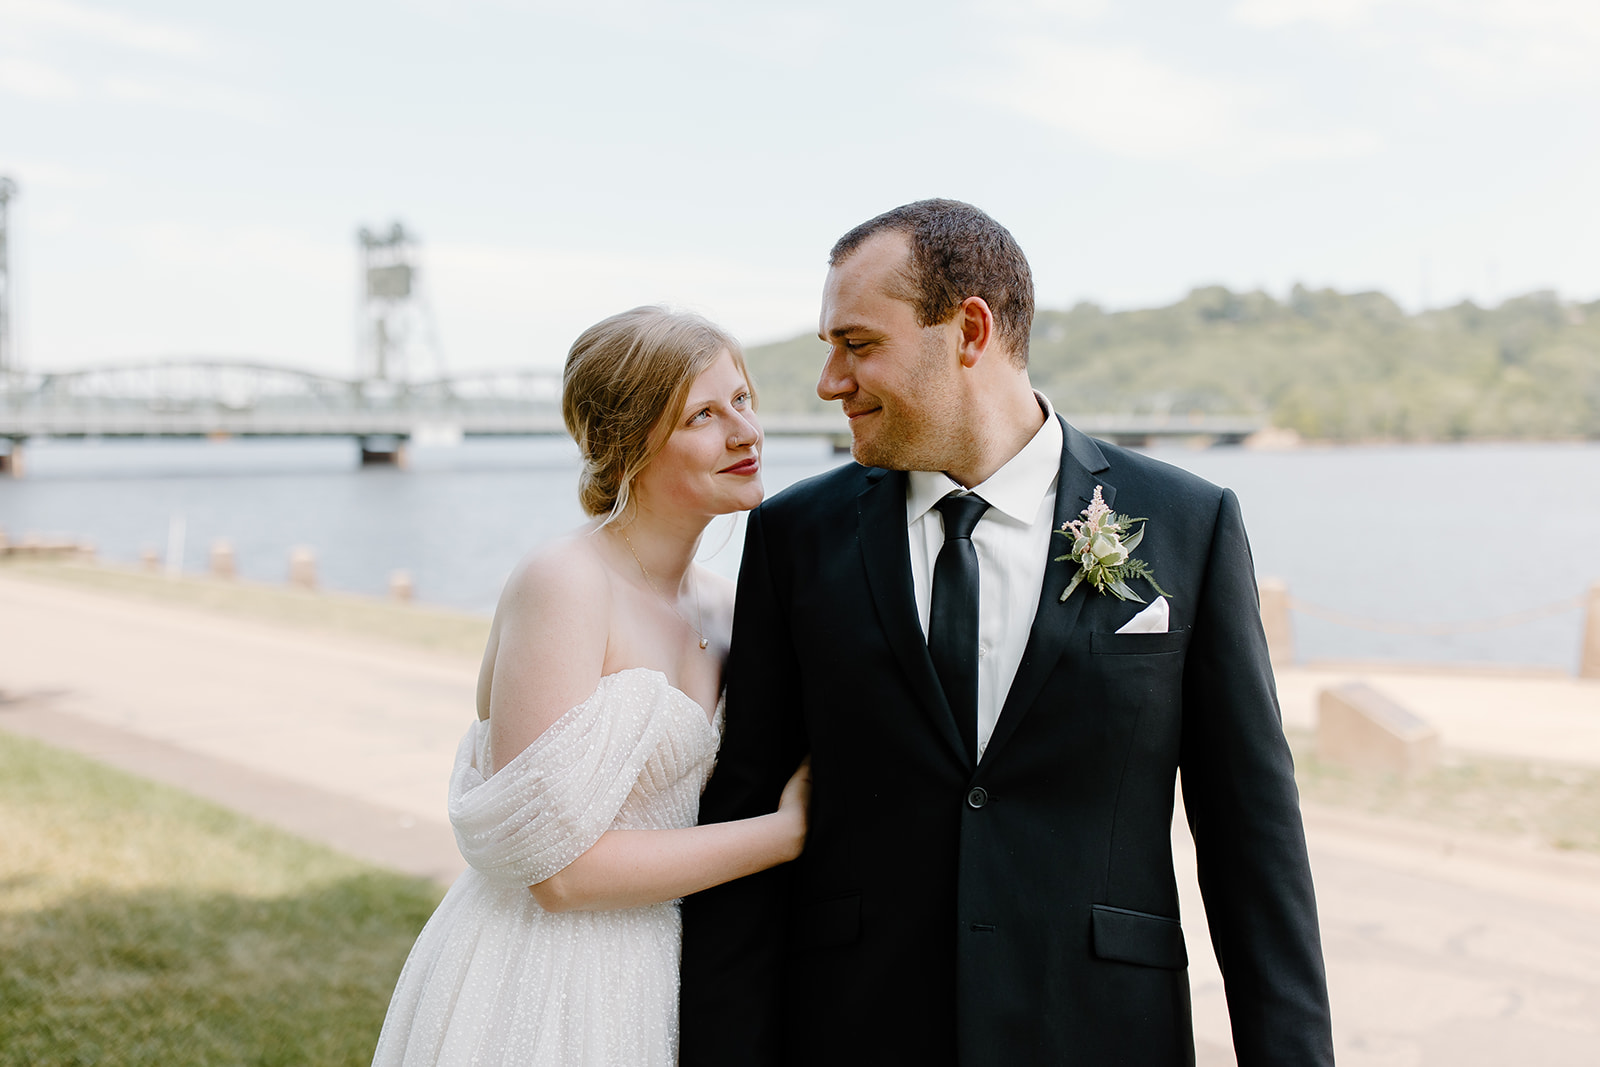 Bride and groom smiling in front of a lift bridge on the St. Croix river